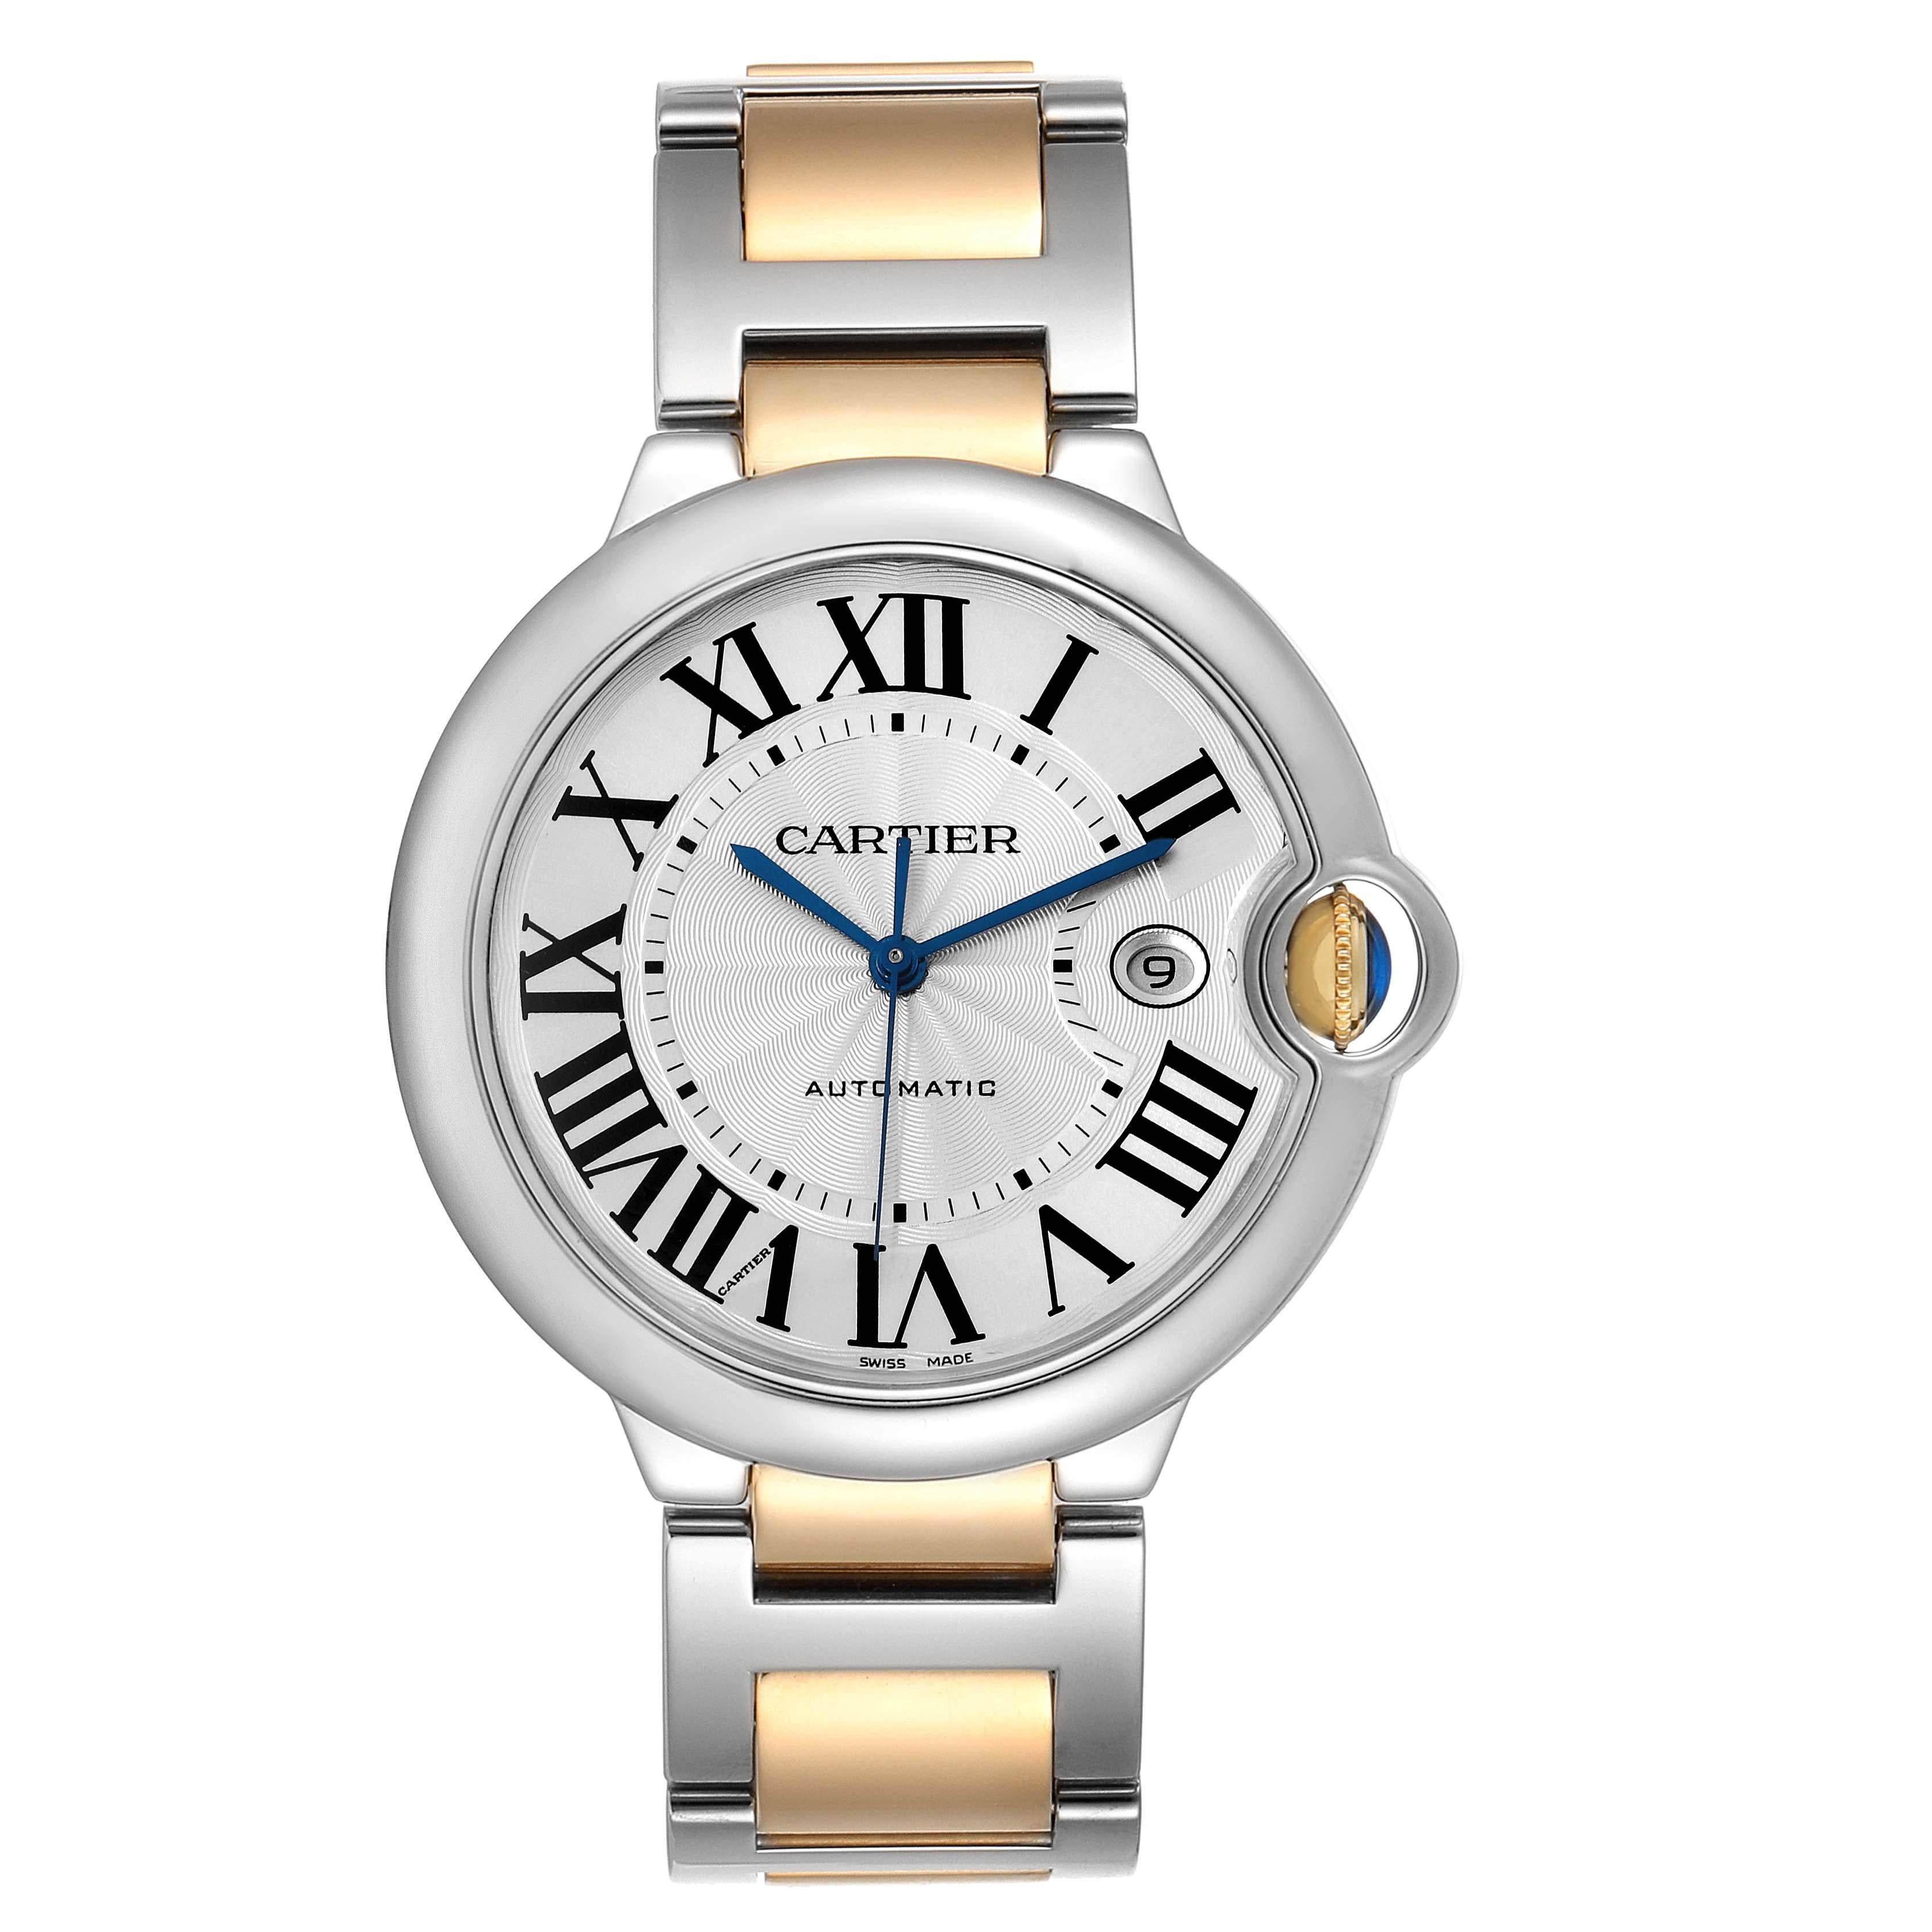 Cartier Ballon Bleu Silver Dial Steel Yellow Gold Mens Watch W69009Z3. Automatic self-winding movement. Caliber 049. Round stainless steel case 42.1 mm in diameter, 13 mm thick. Fluted 18k yellow gold crown set with the blue spinel cabochon. .